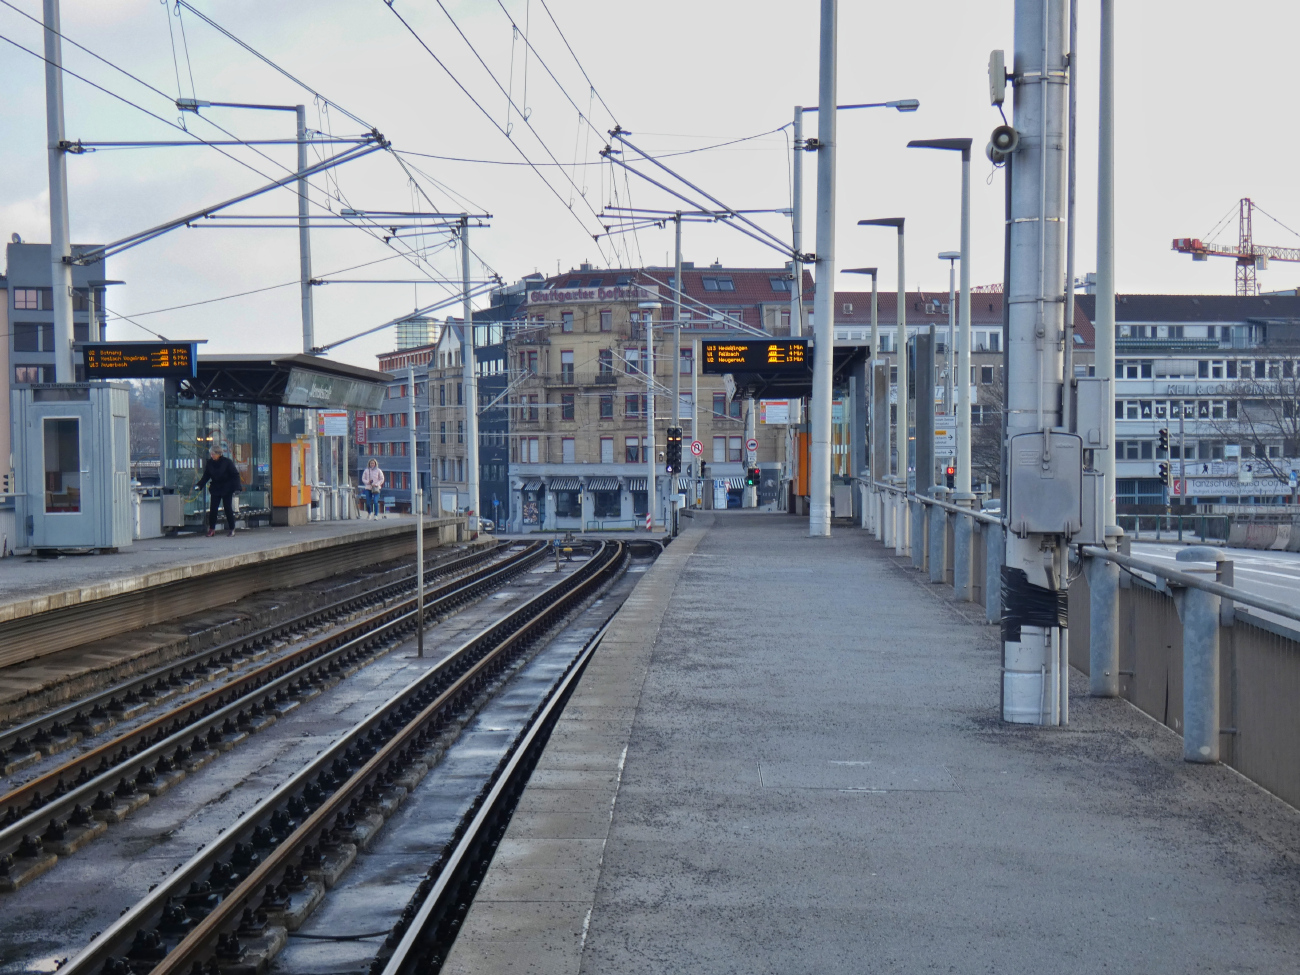 Stuttgart — Tramway Lines and Infrastructure